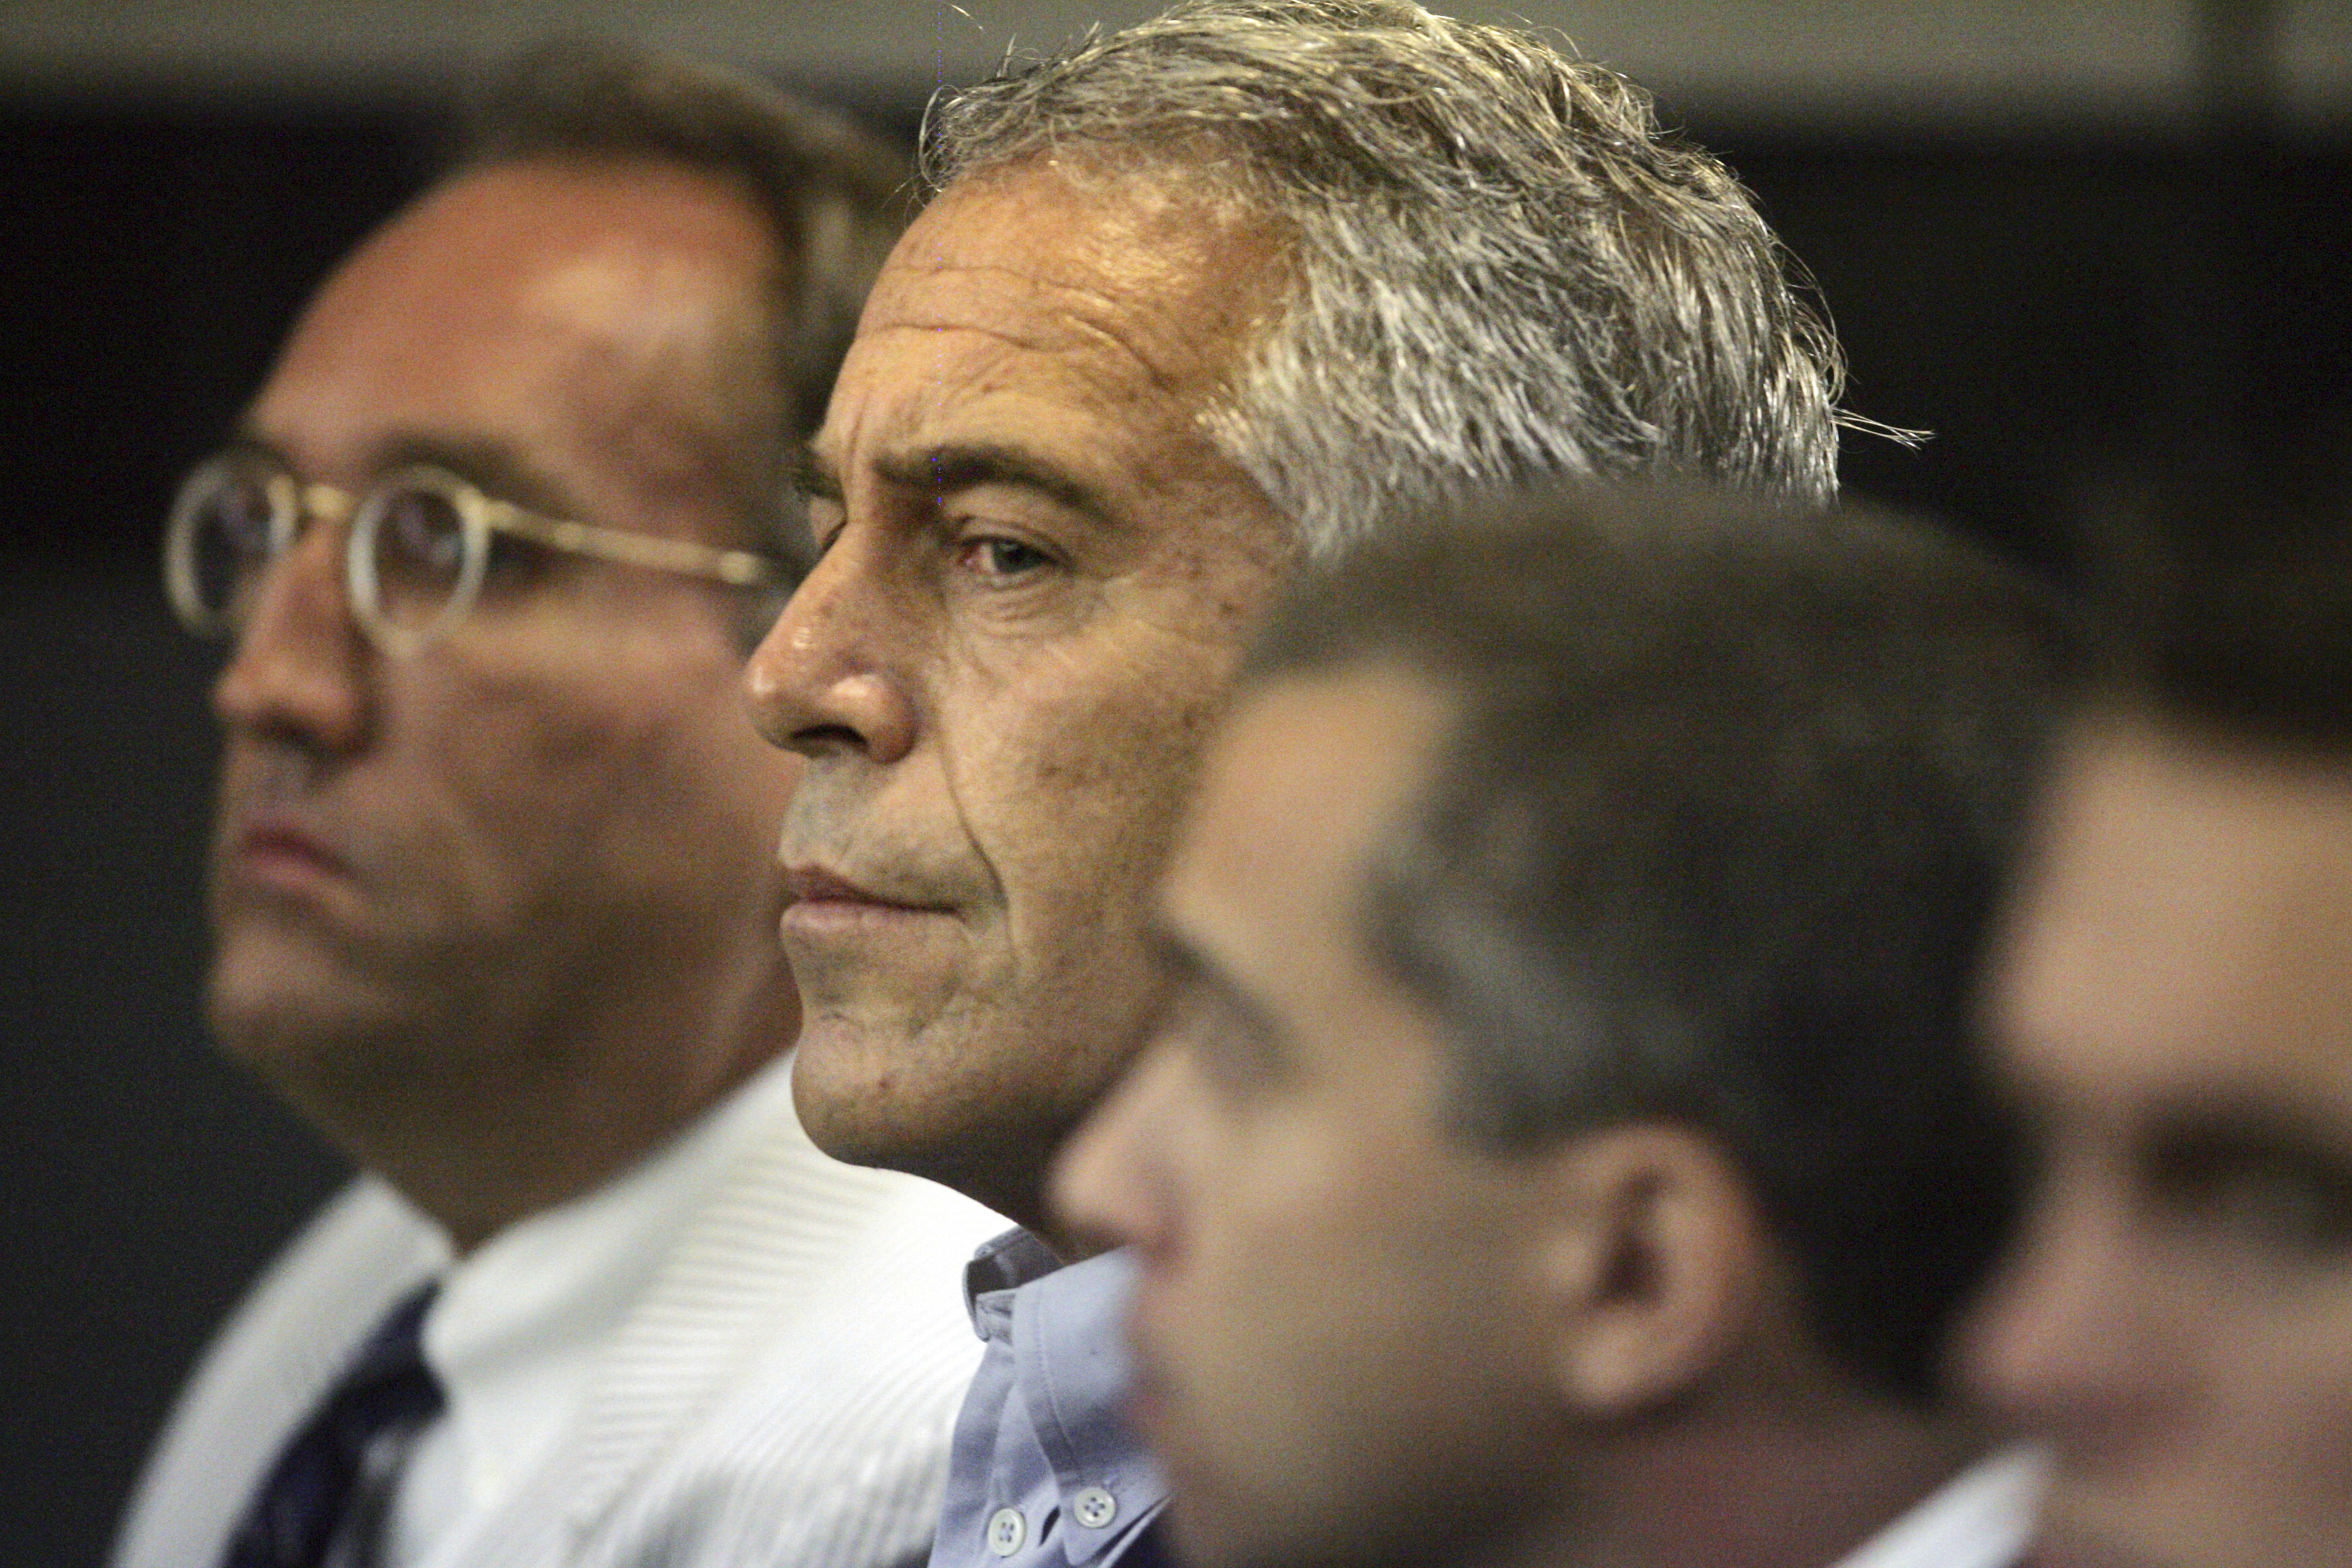 Questions swirl around Epstein's monitoring before suicide